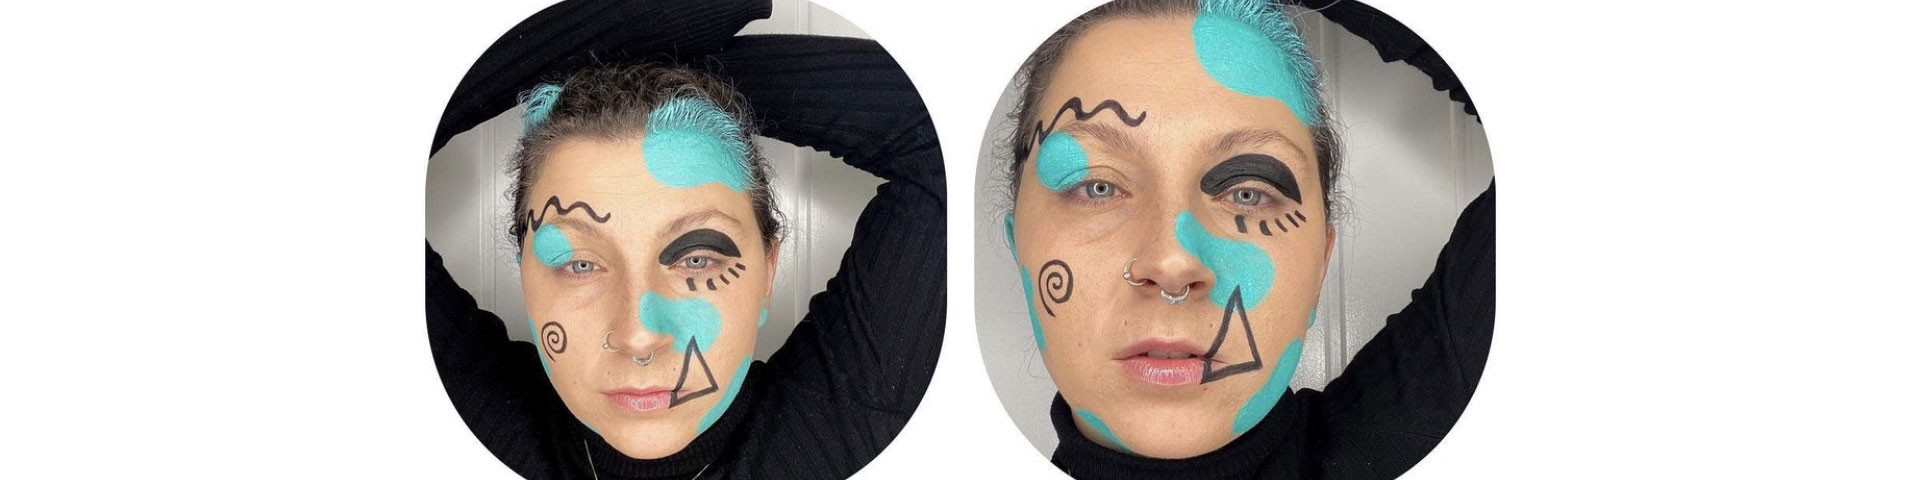 Images show a make-up look created by Annistasia Chandler featuring geometric patterns in blue and black